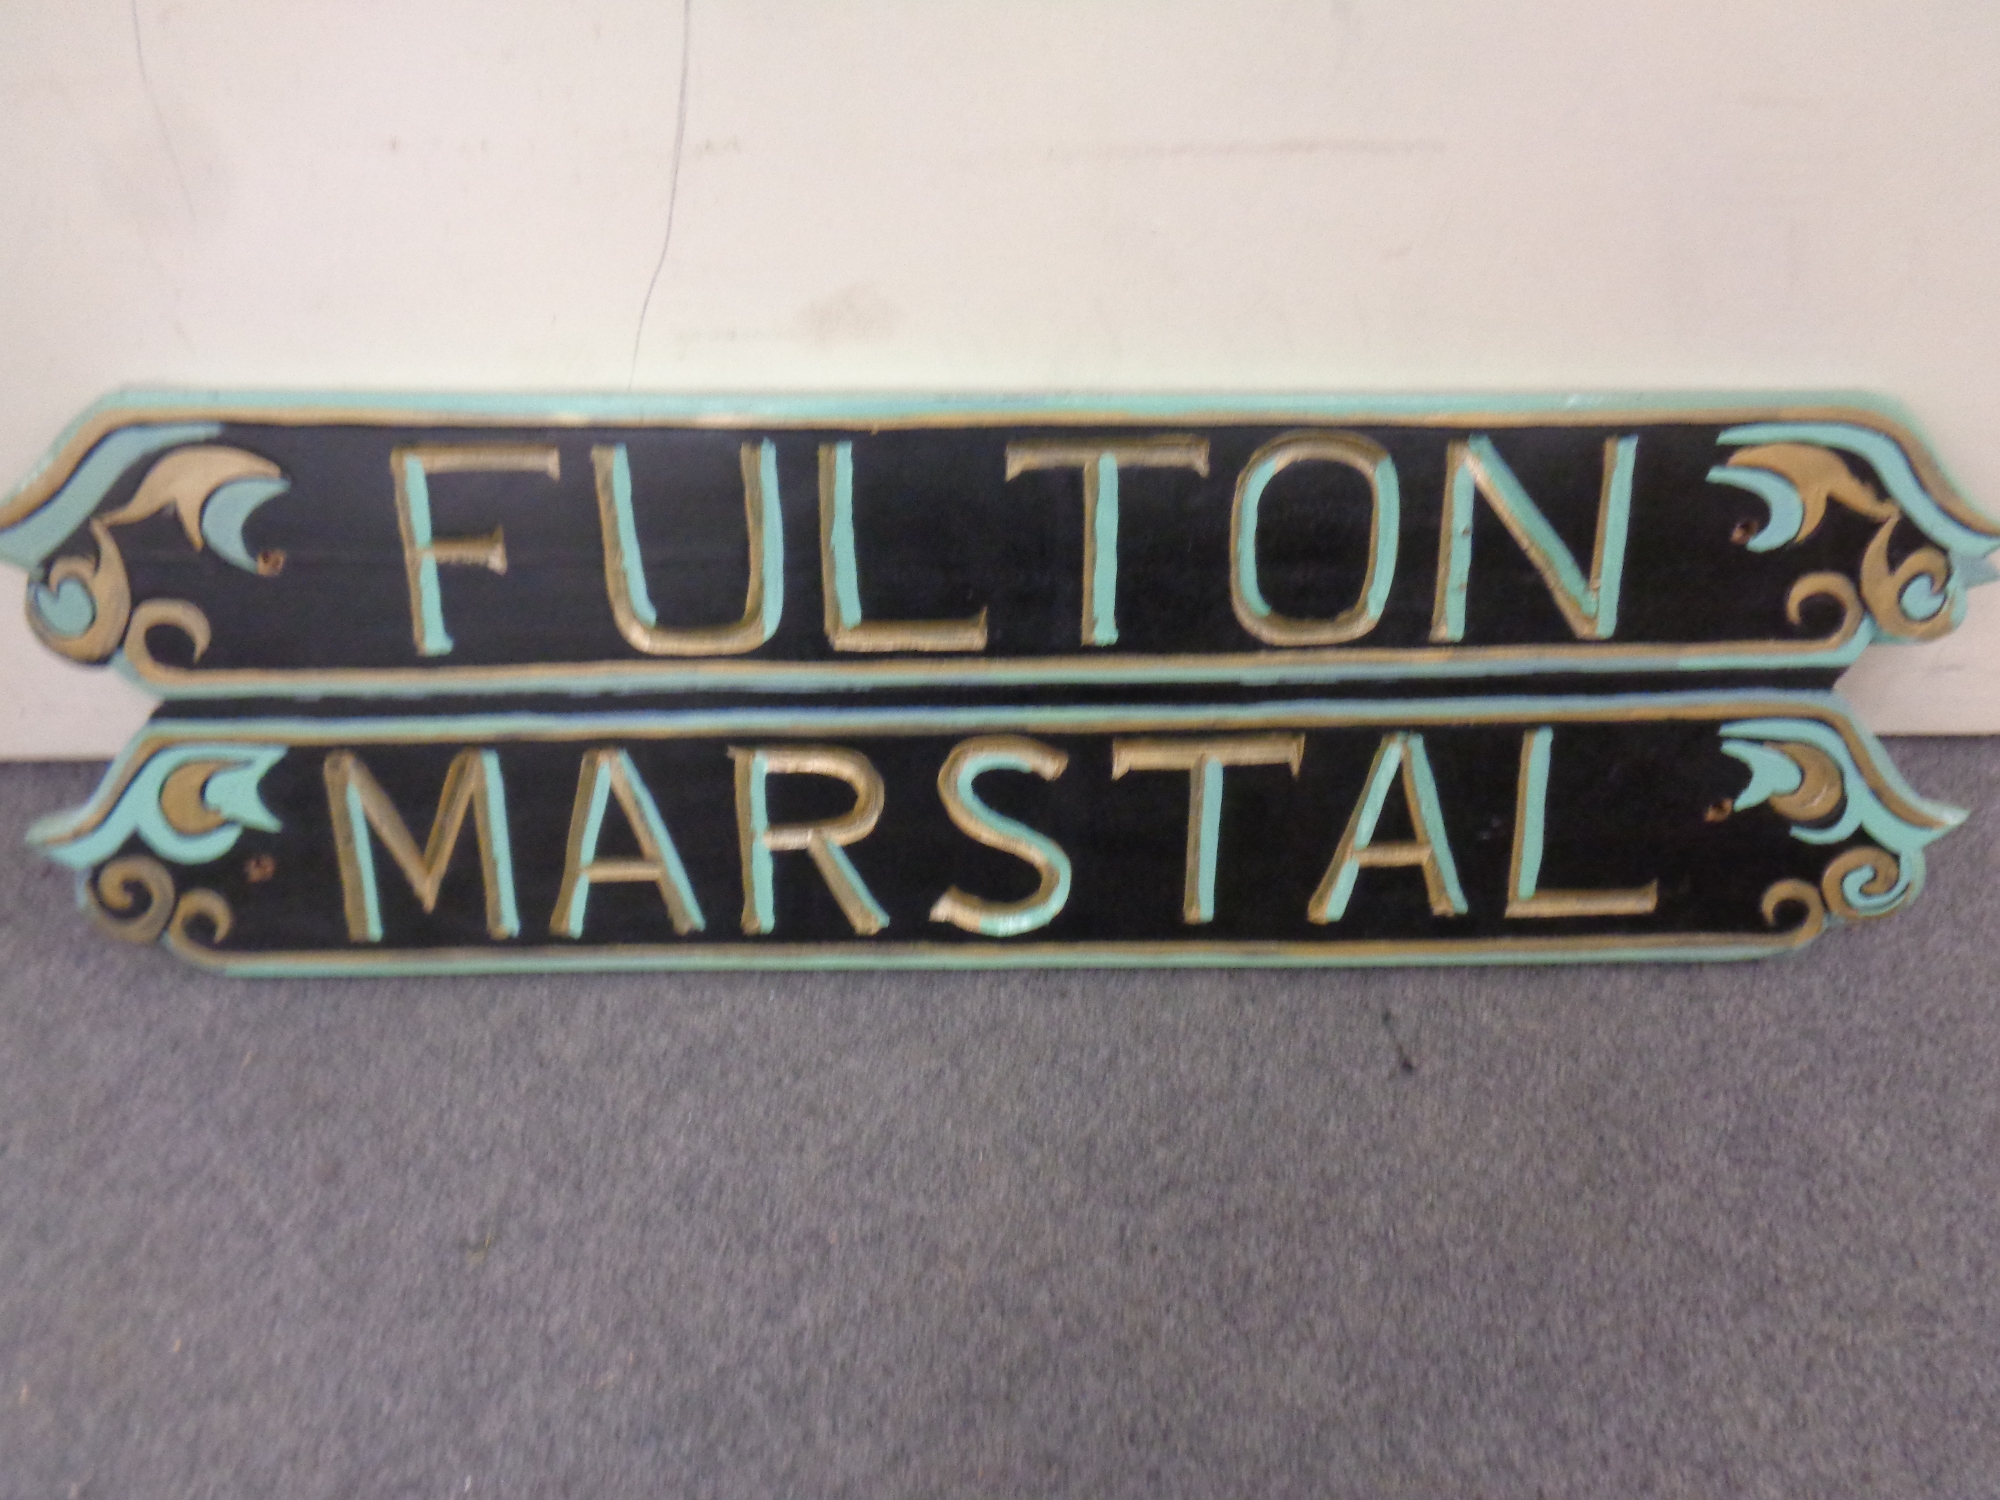 A hand painted wooden sign Fulton Marstal